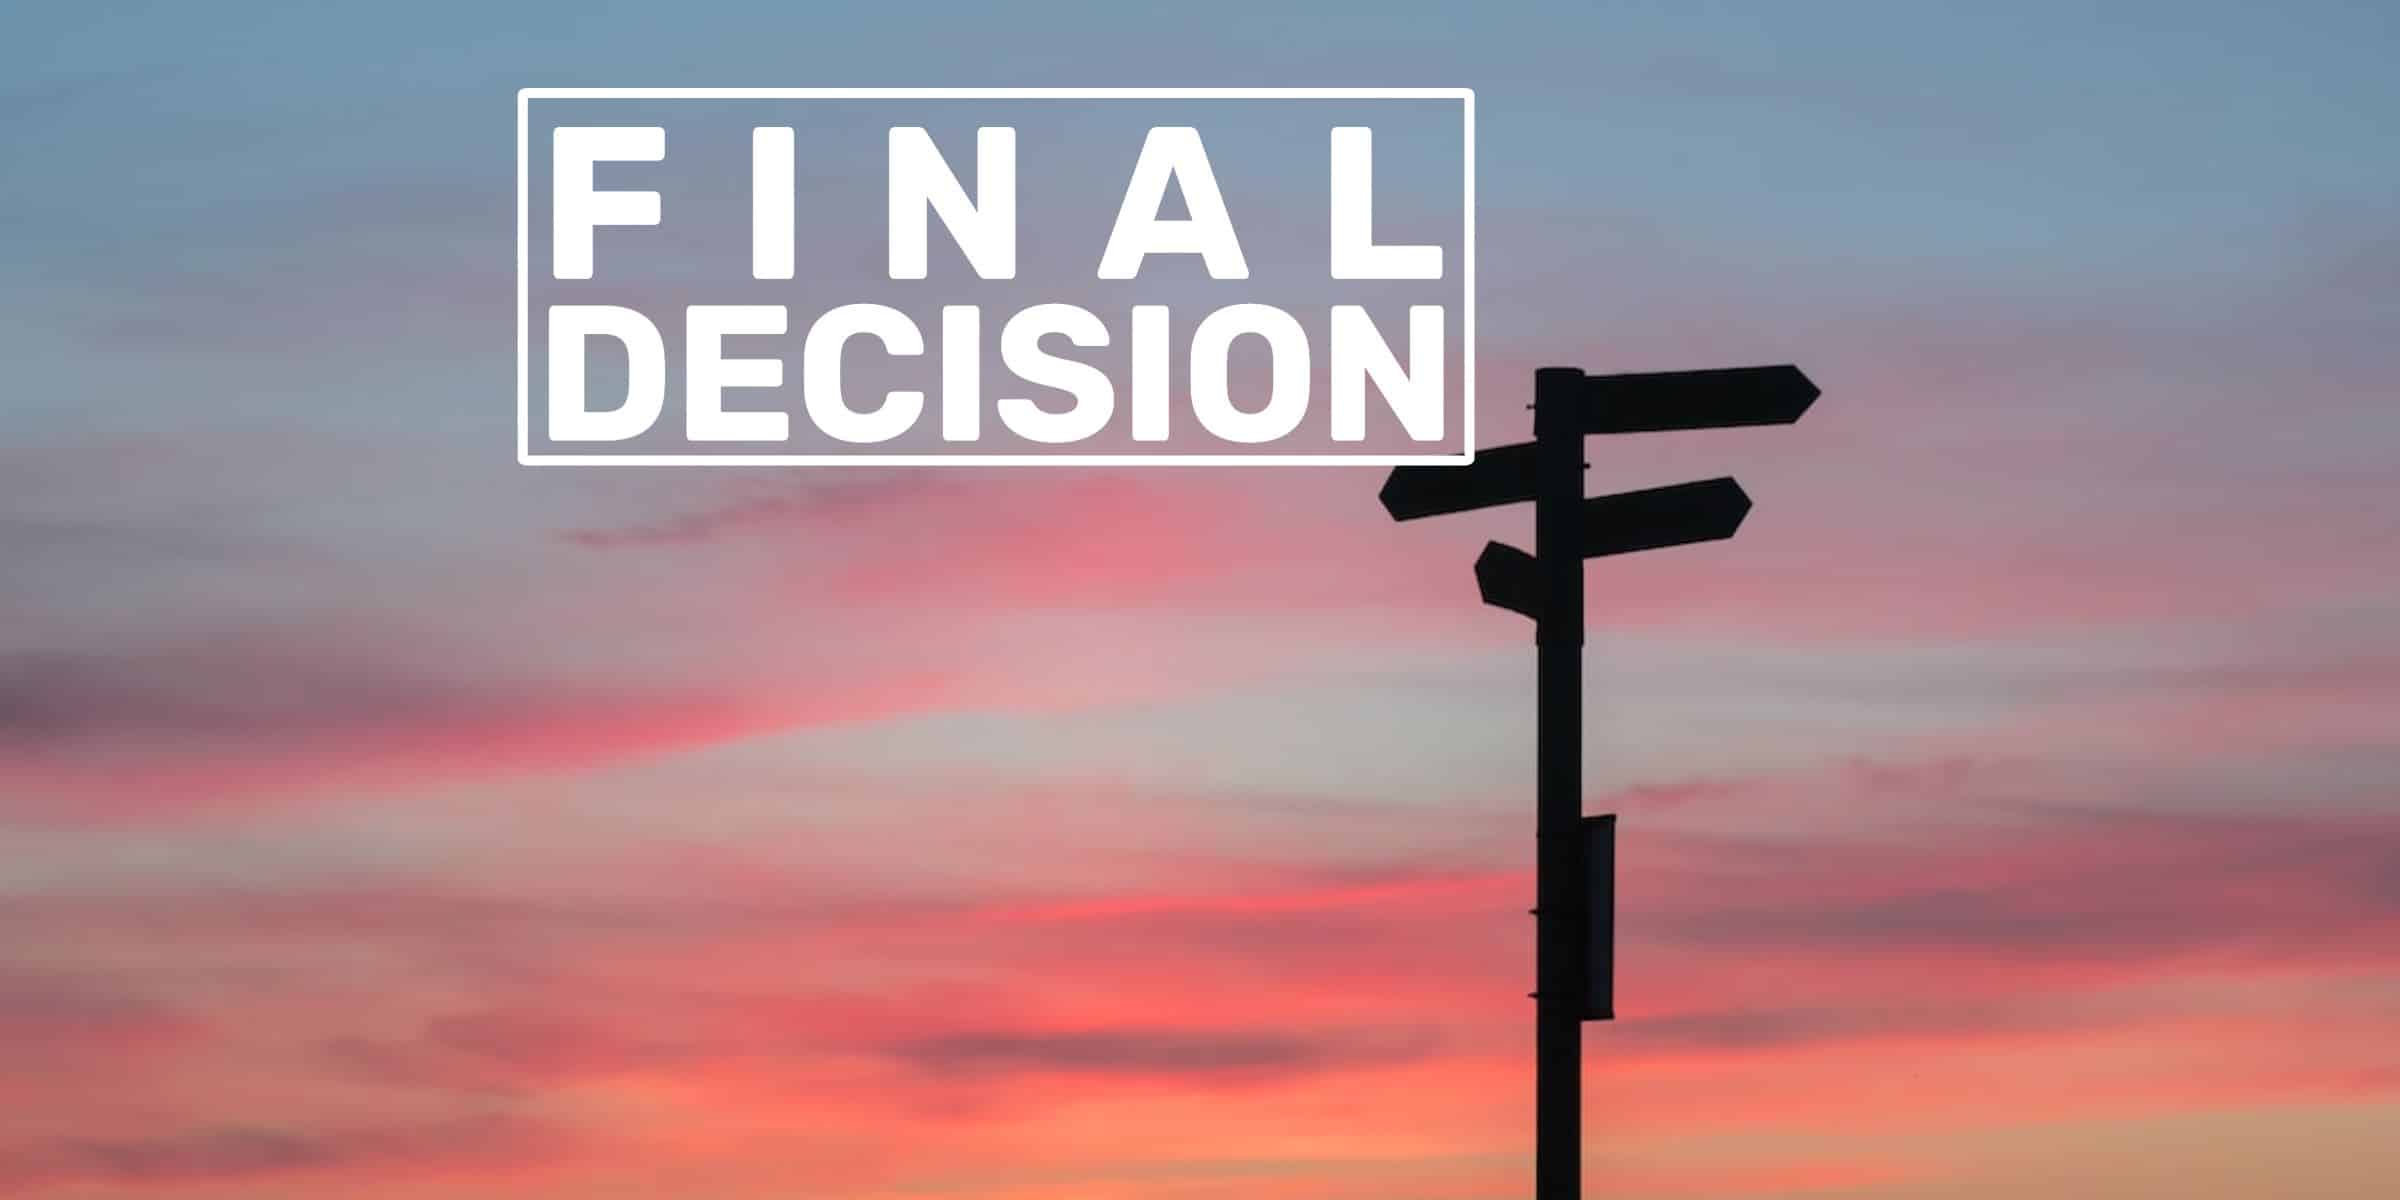 Beautiful orange-pink sunset behind silhouette street sign with many directions and text overlay "Final Decision."